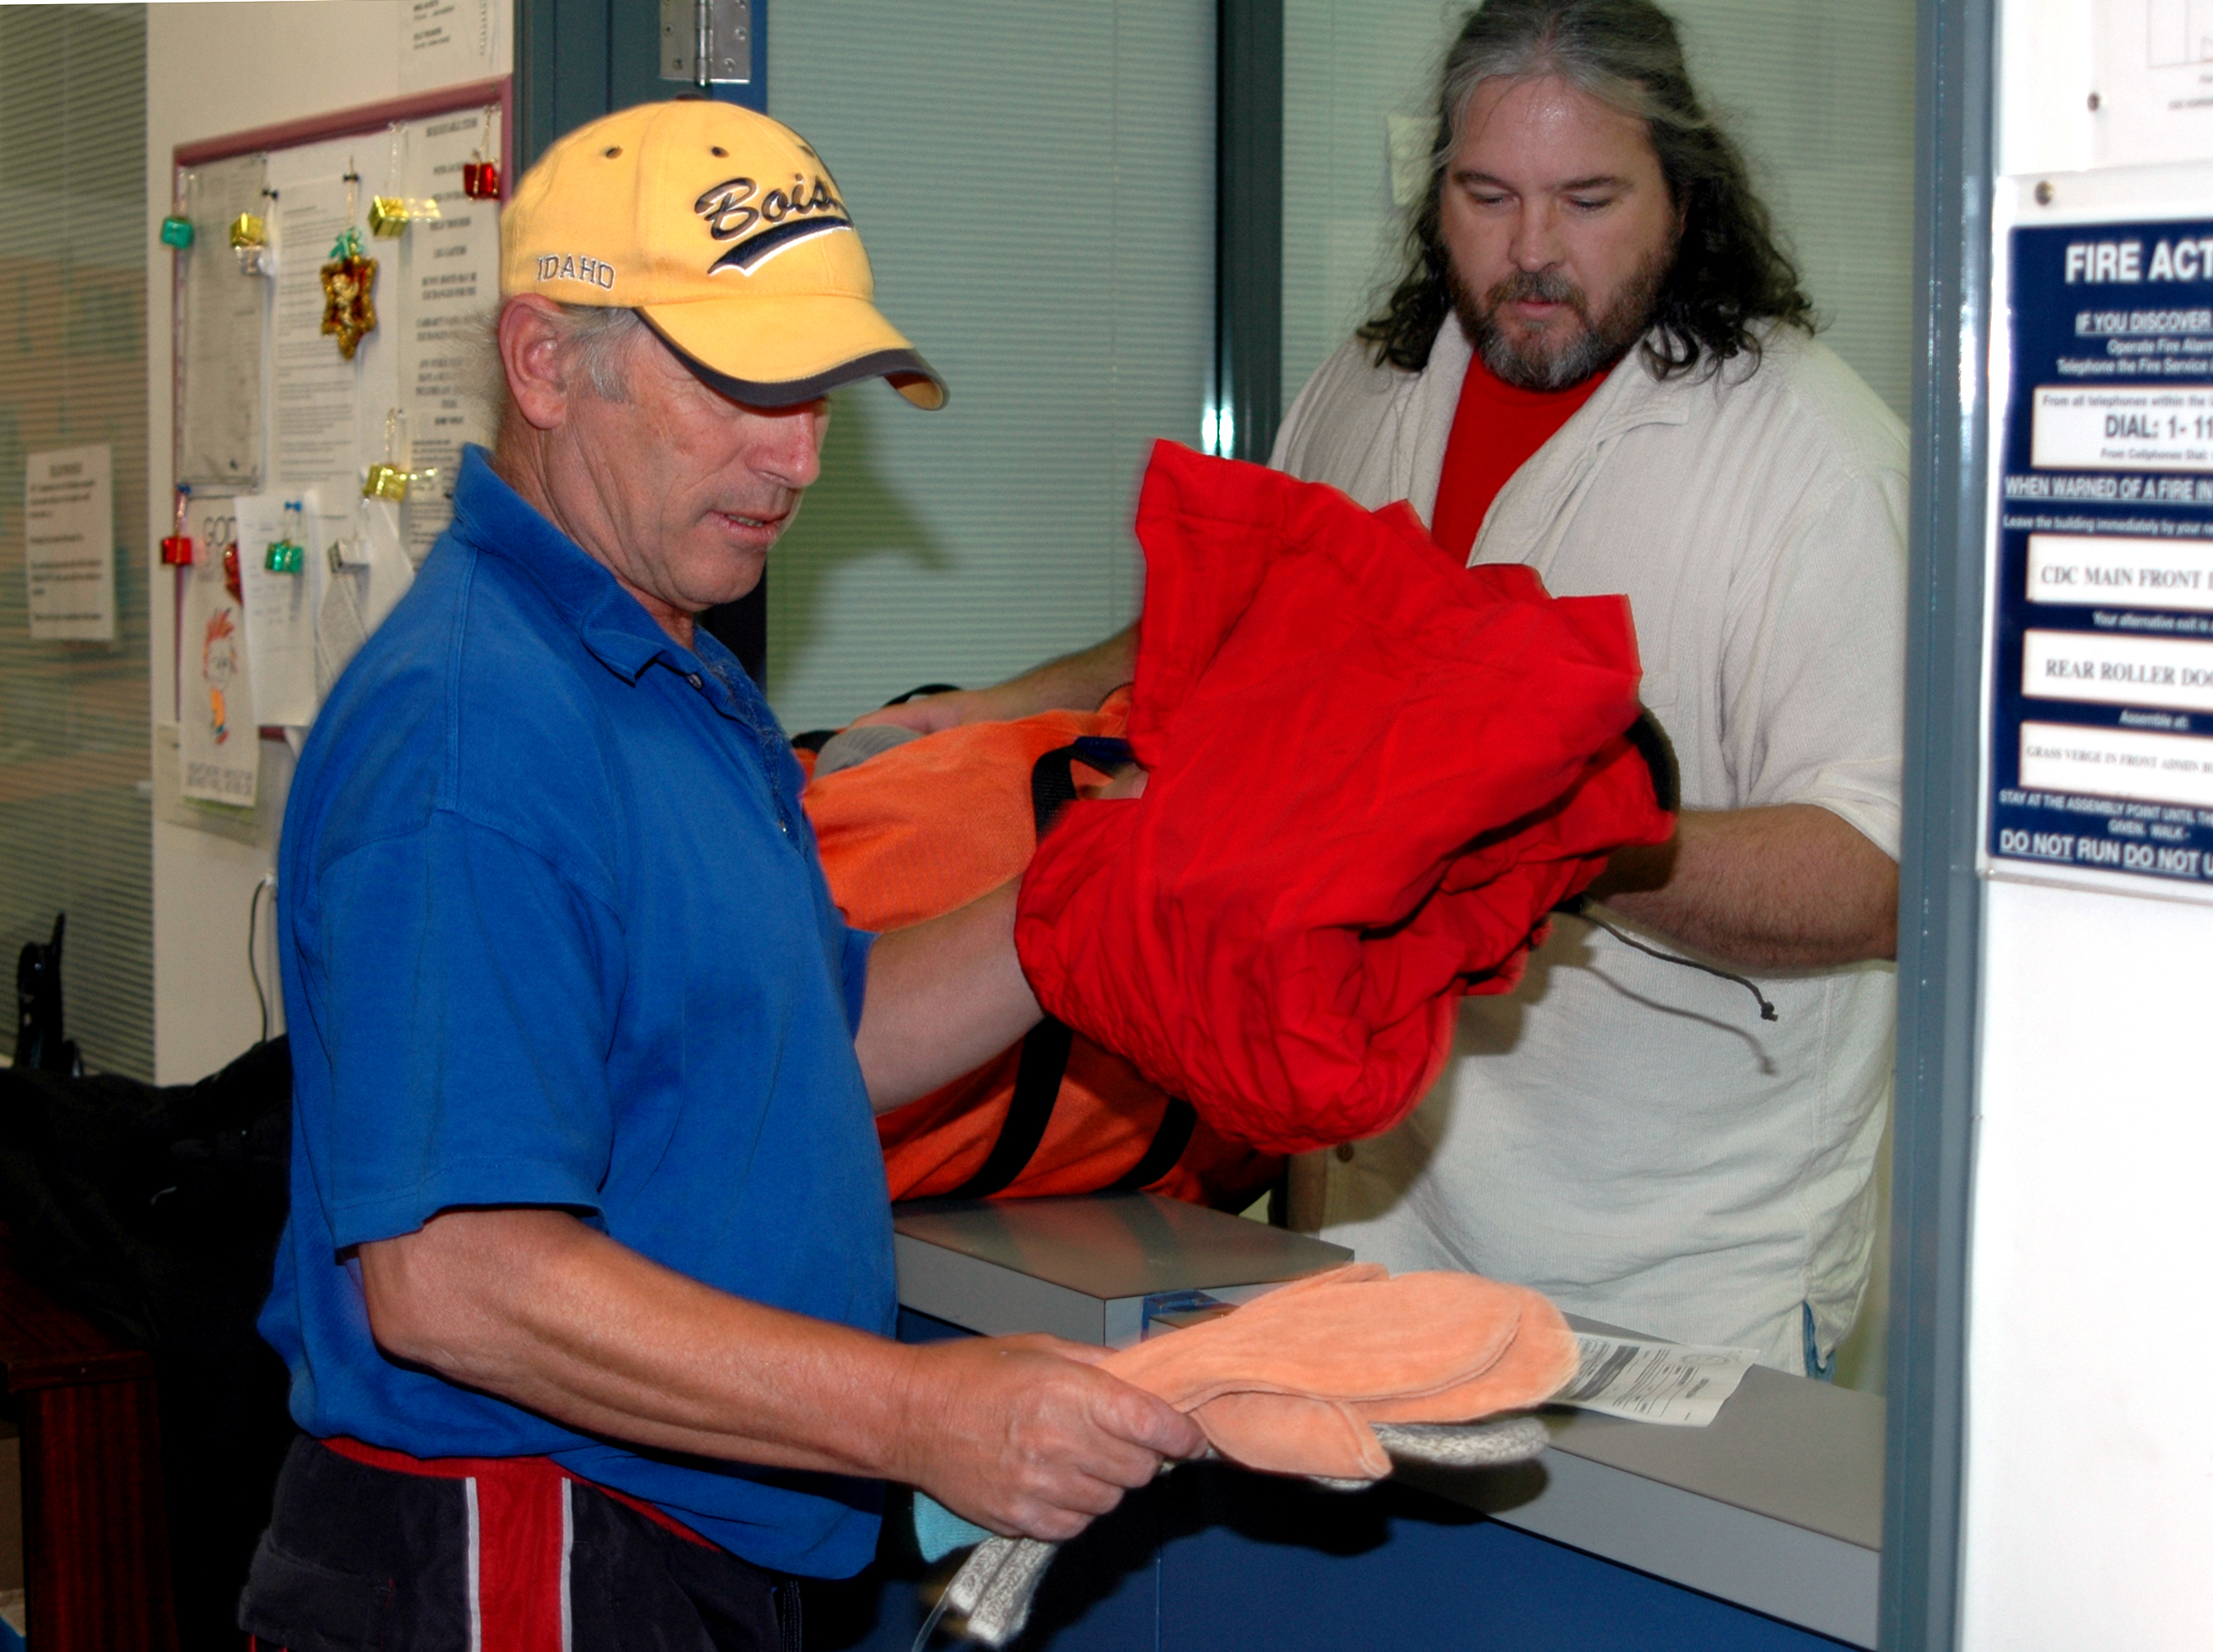 Exchanging gear at the CDC.